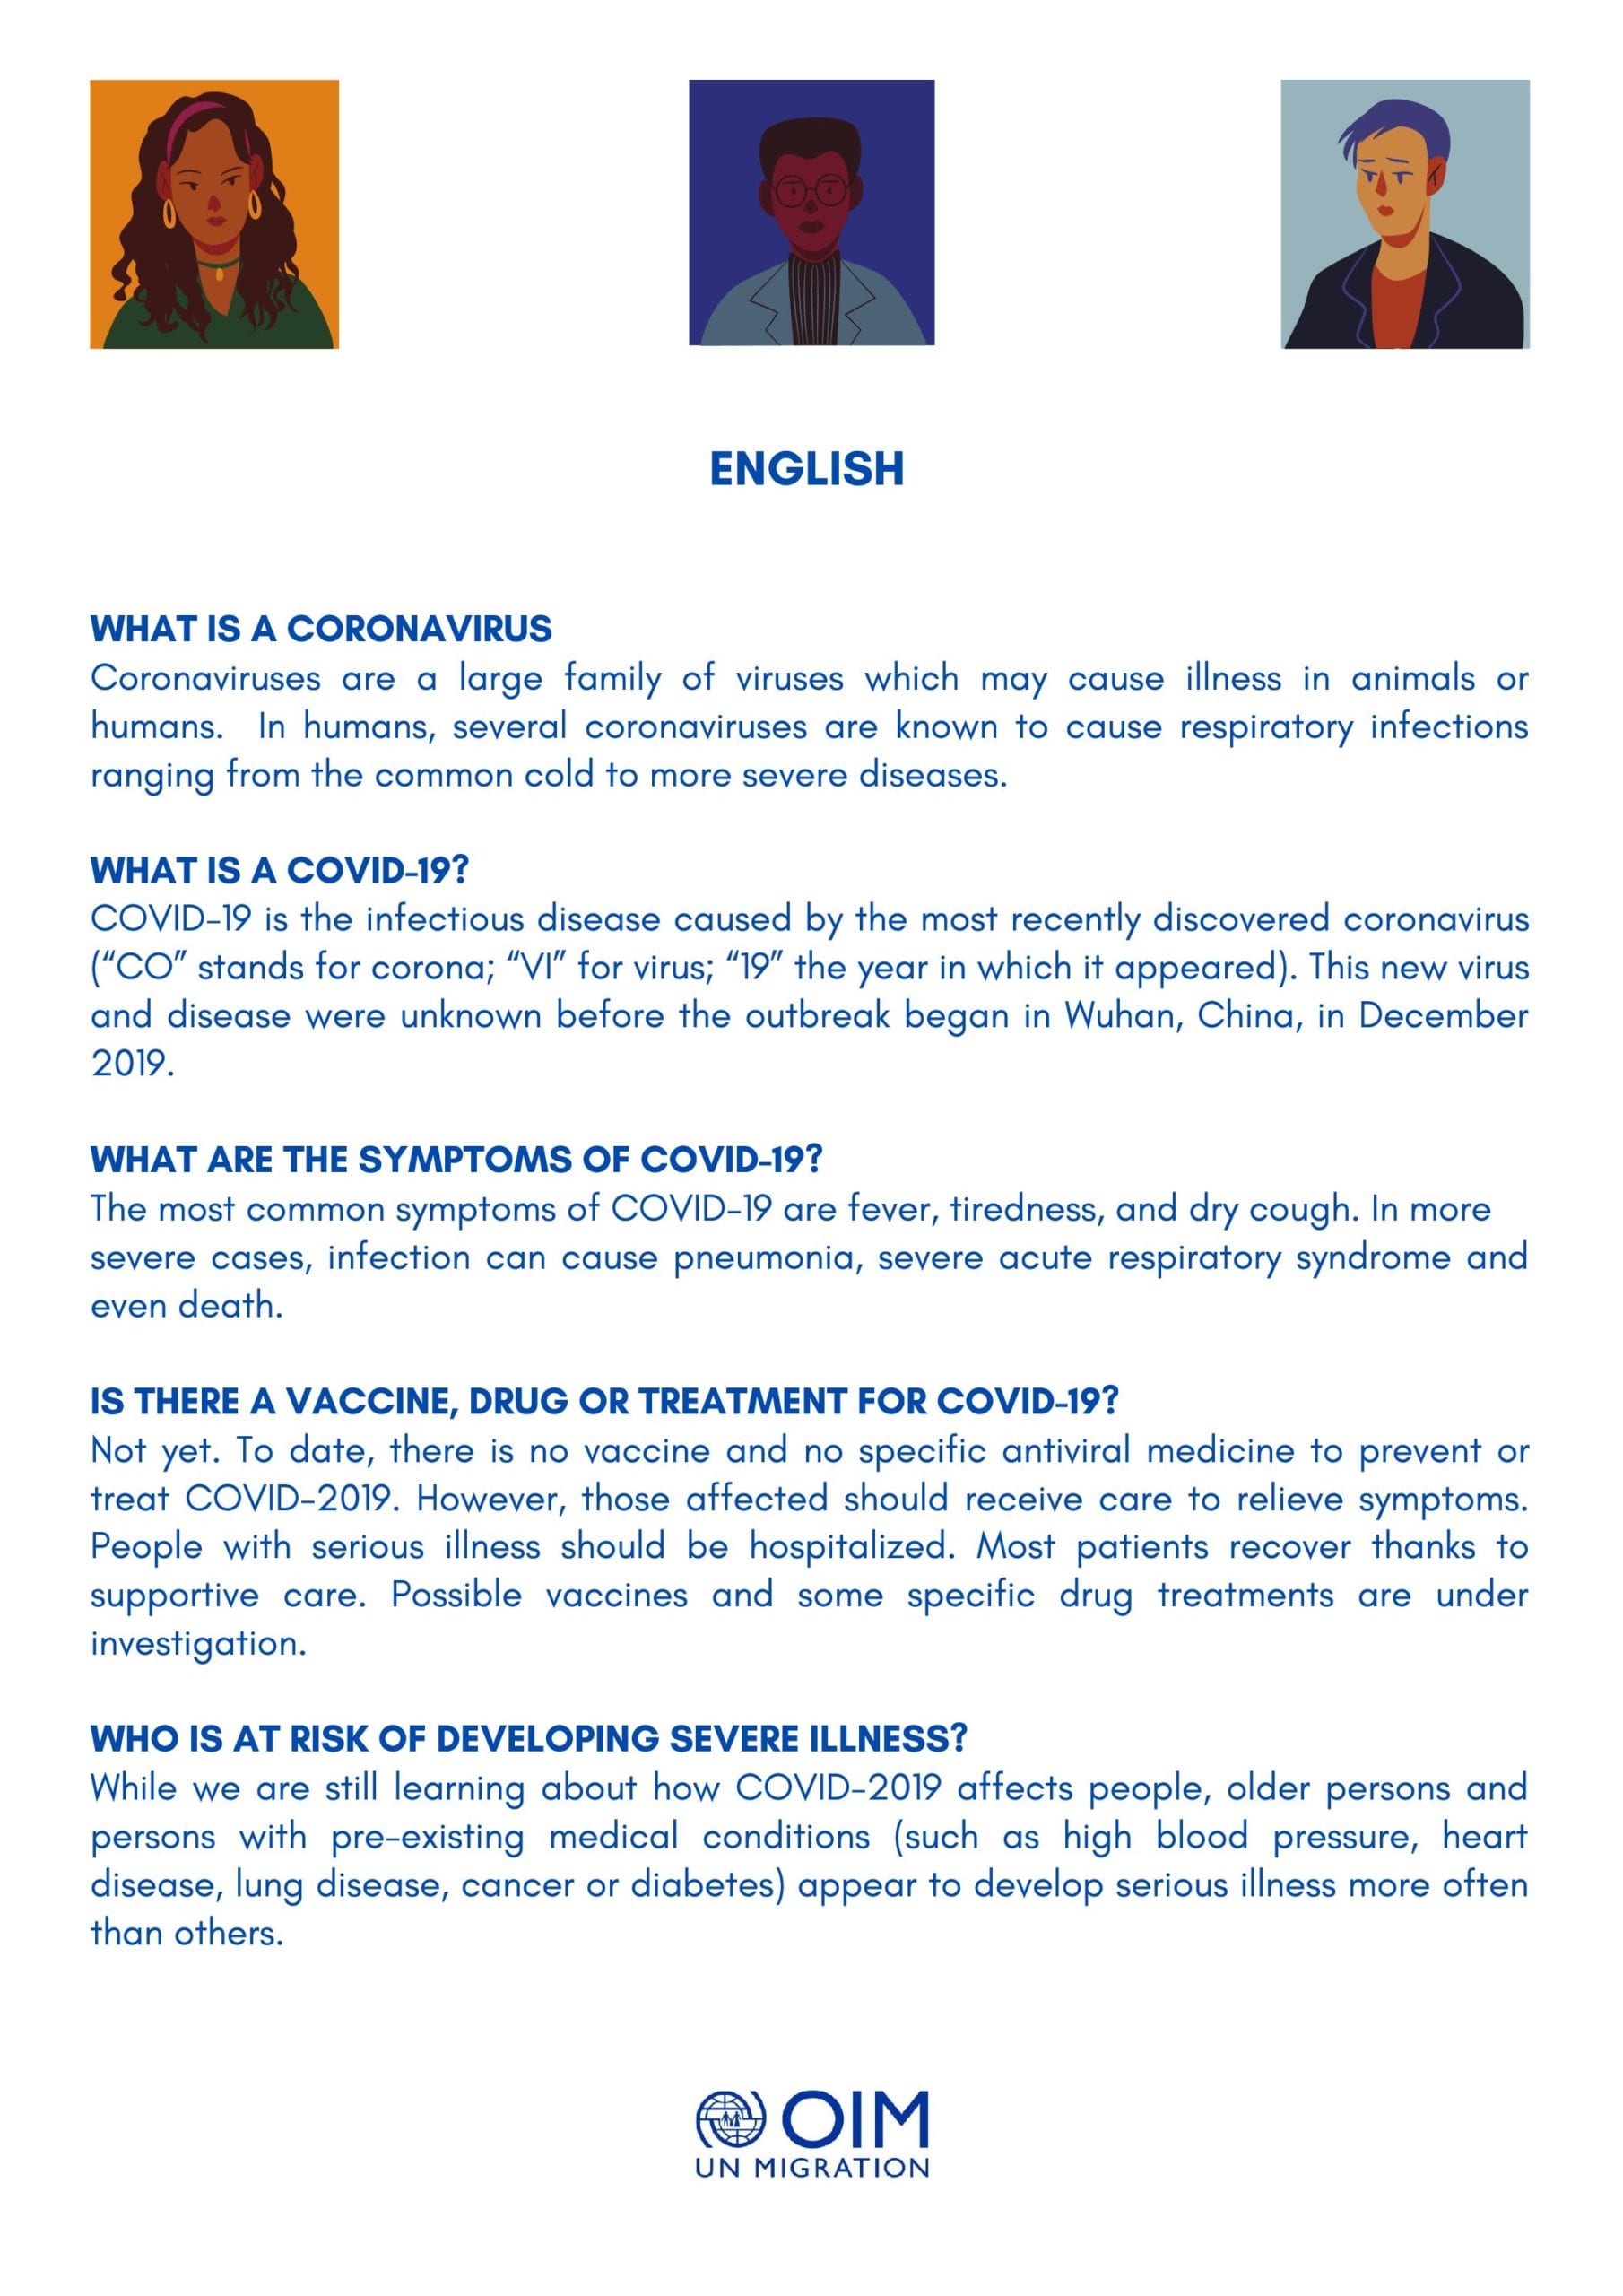 COVID-19 Information Brochure (With Supplementary Audio)